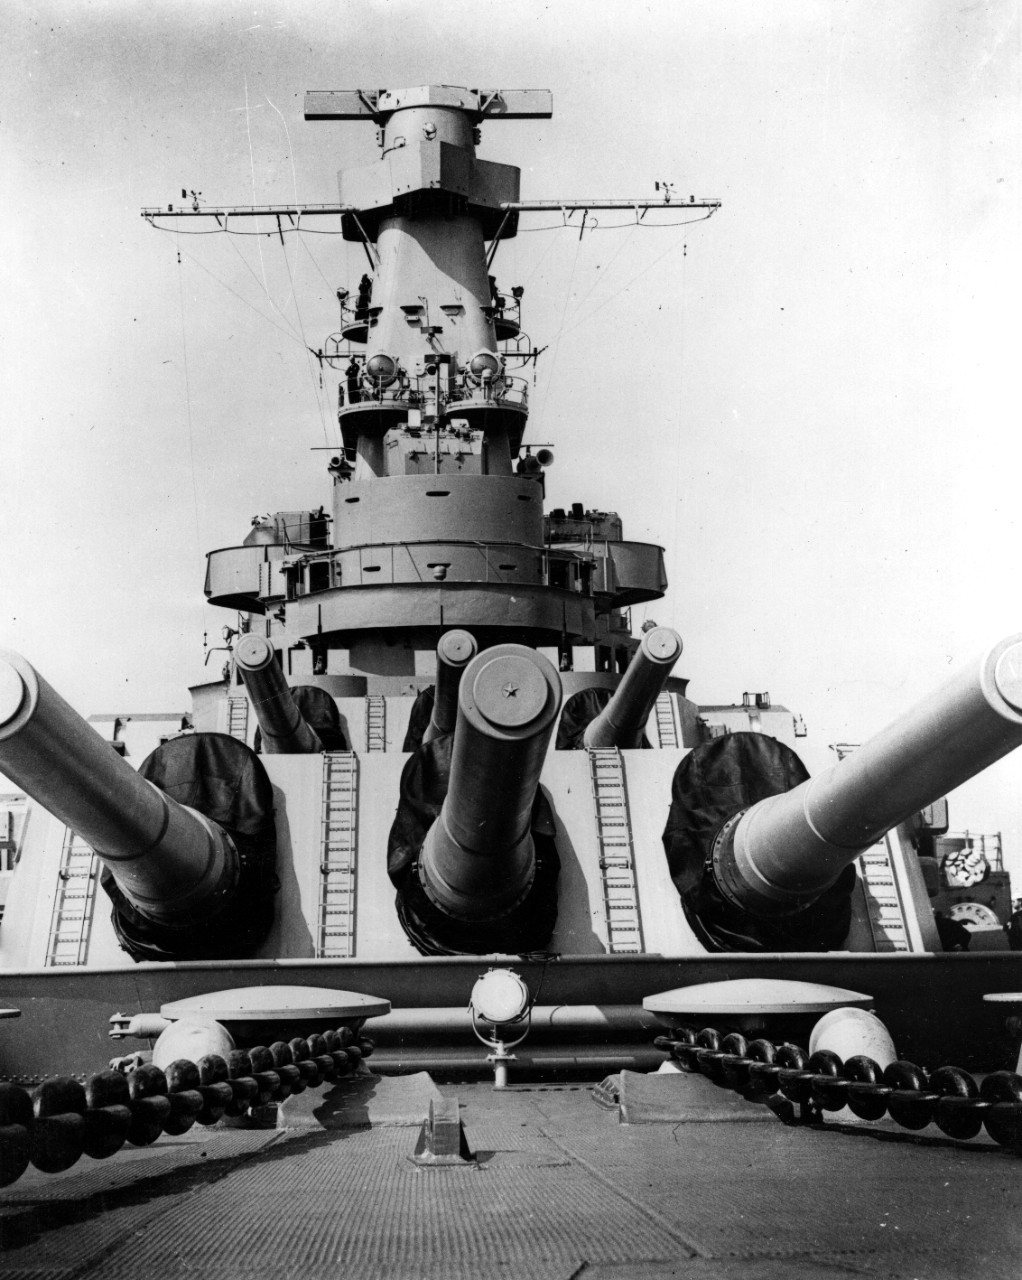 A view of Indiana and her forward 16-inch 45-caliber guns, taken at Newport News, Va., on the day of her commissioning, 30 April 1942. Note the anchor chains and capstains, armored conning tower and Mk 38 main battery director atop her superstructure. Fire control radar antennas have not yet been fitted atop her gun directors. (U.S. Navy Photograph 80-G-6692, National Archives and Records Administration, Still Pictures Division, College Park, Md.)